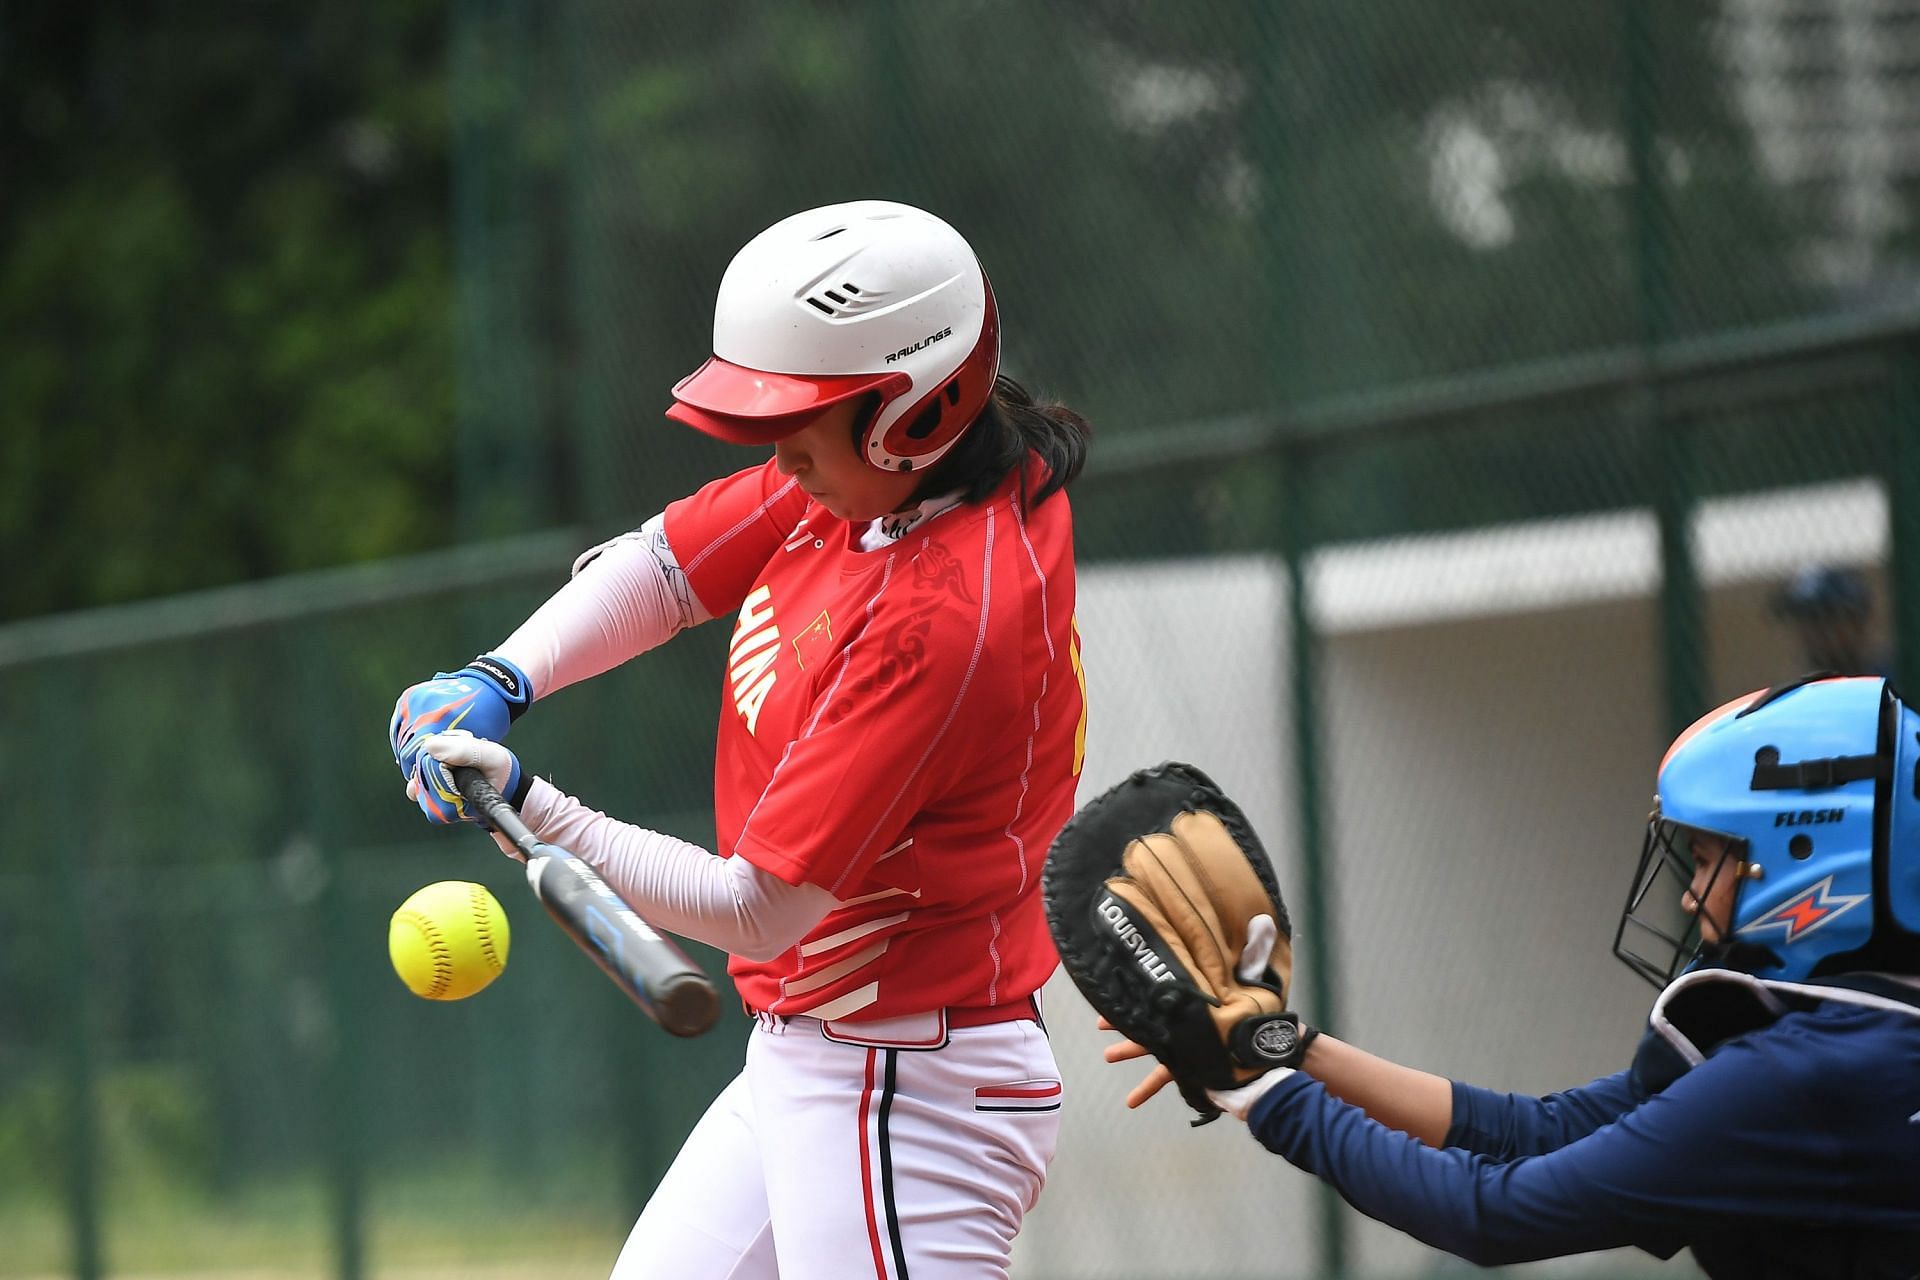 12th Softball Women&#039;s Asia Cup 2019: Jia Xu of China bats during the match between China and India